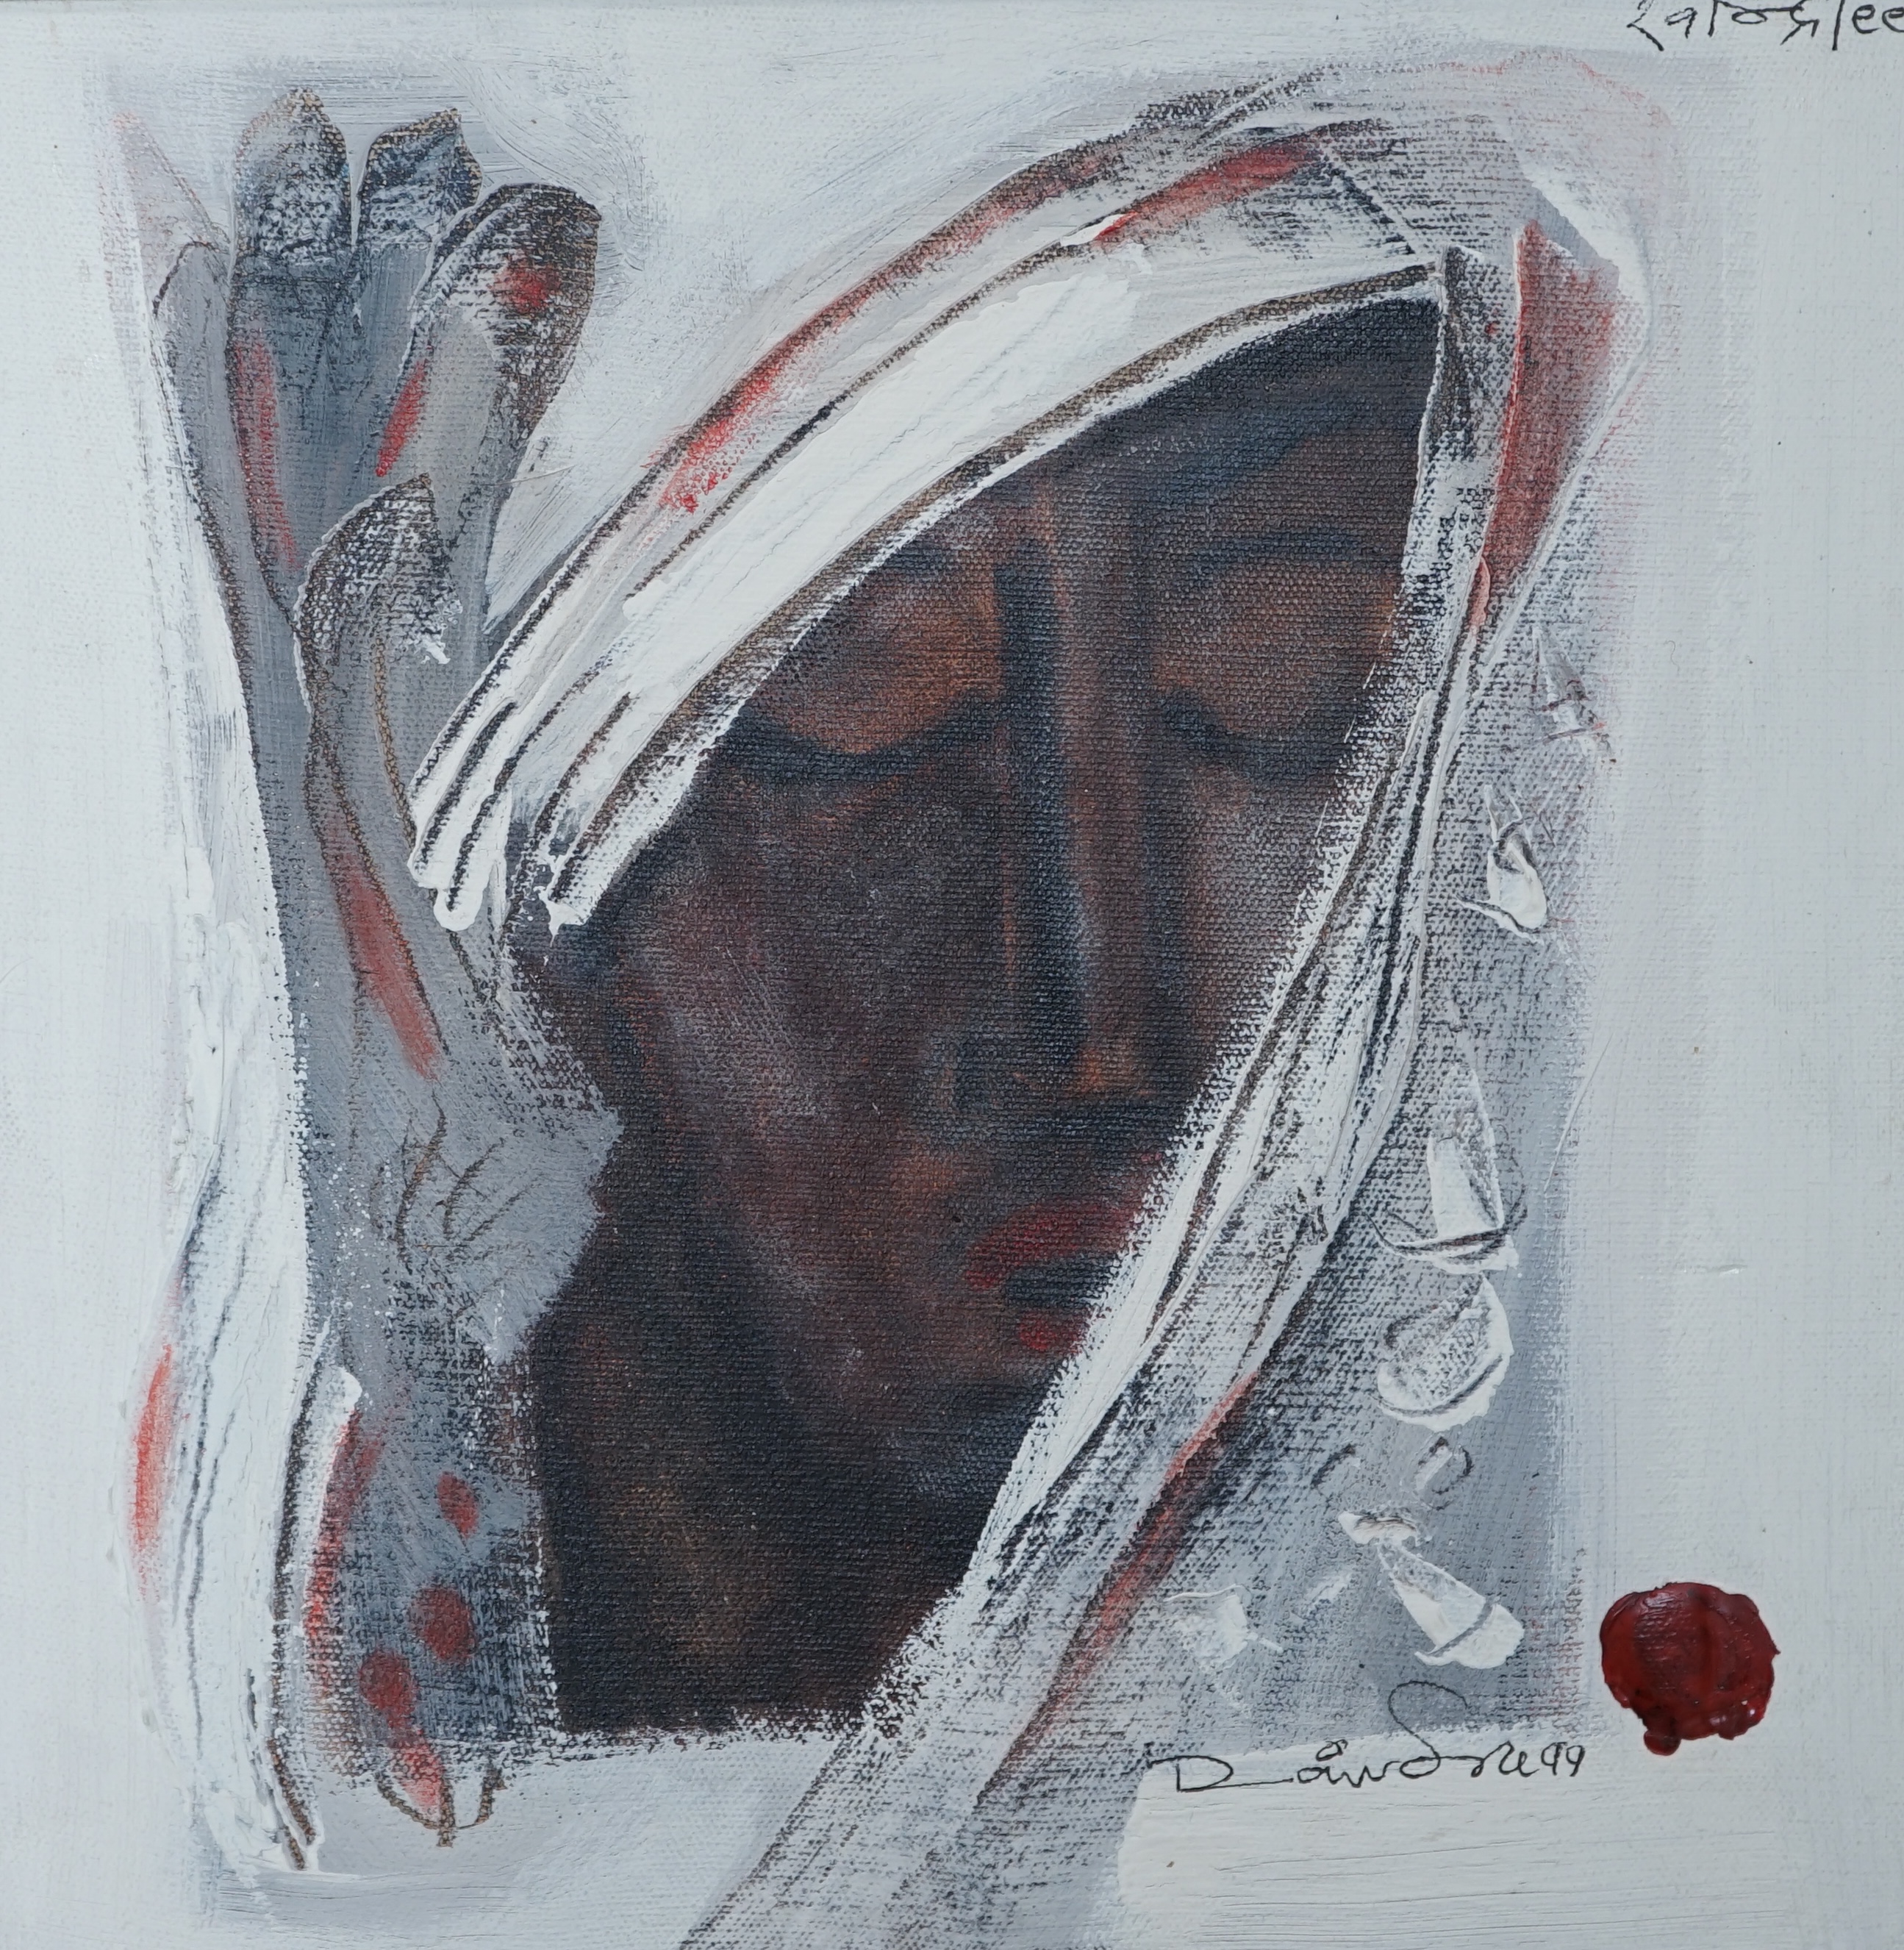 Indian School, oil on canvas, Portrait, various inscriptions verso including ‘Ravindra's Mumbai’, indistinctly signed and dated ‘99, 29 x 29cm. Condition - good